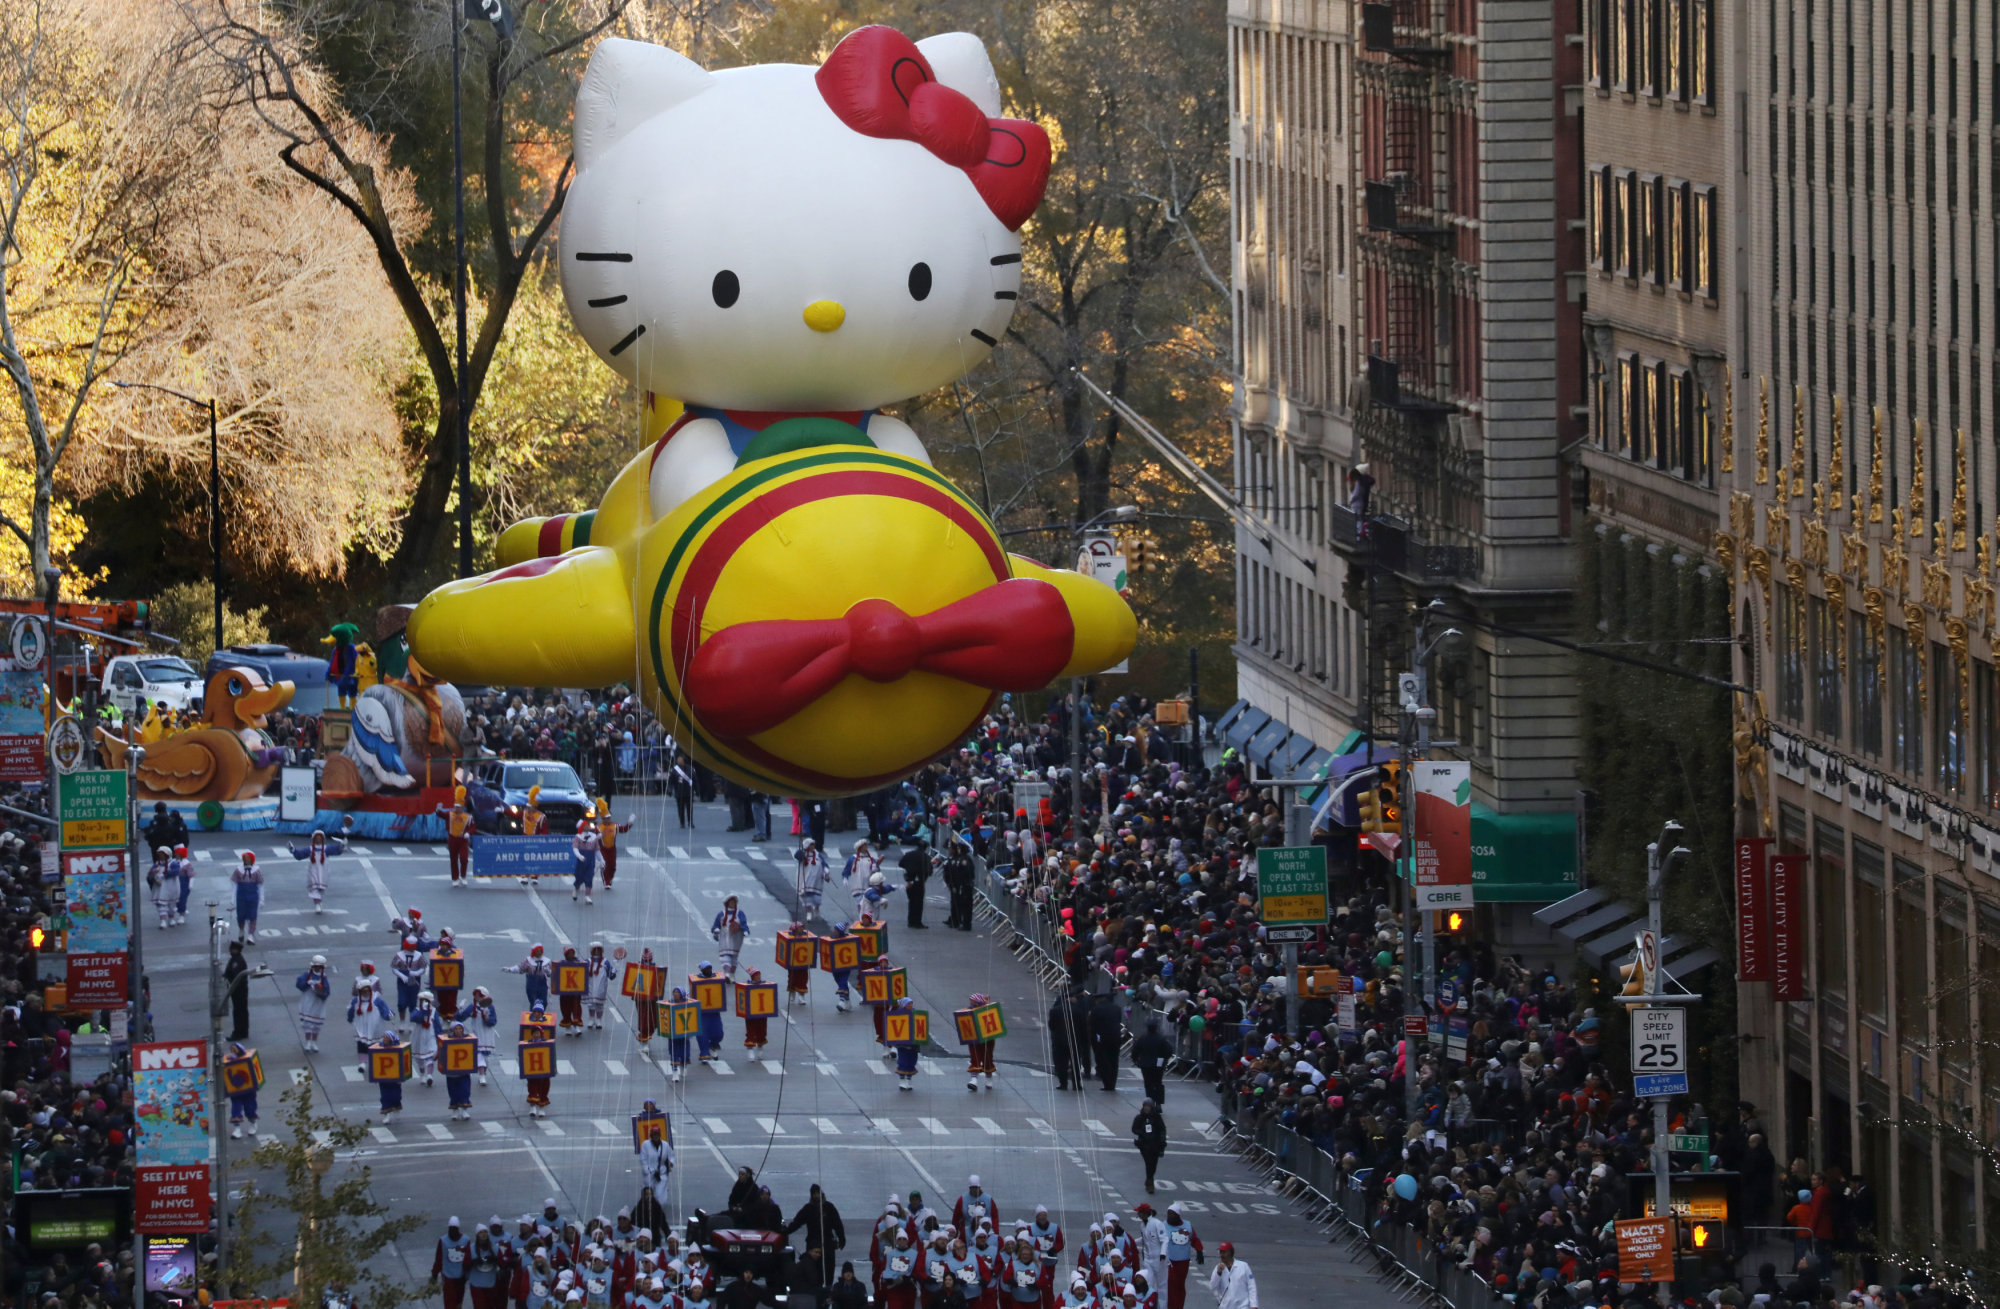 The Hello Kitty balloon appears in this year's Thanksgiving Day Parade in New York on Nov. 23. | REUTERS